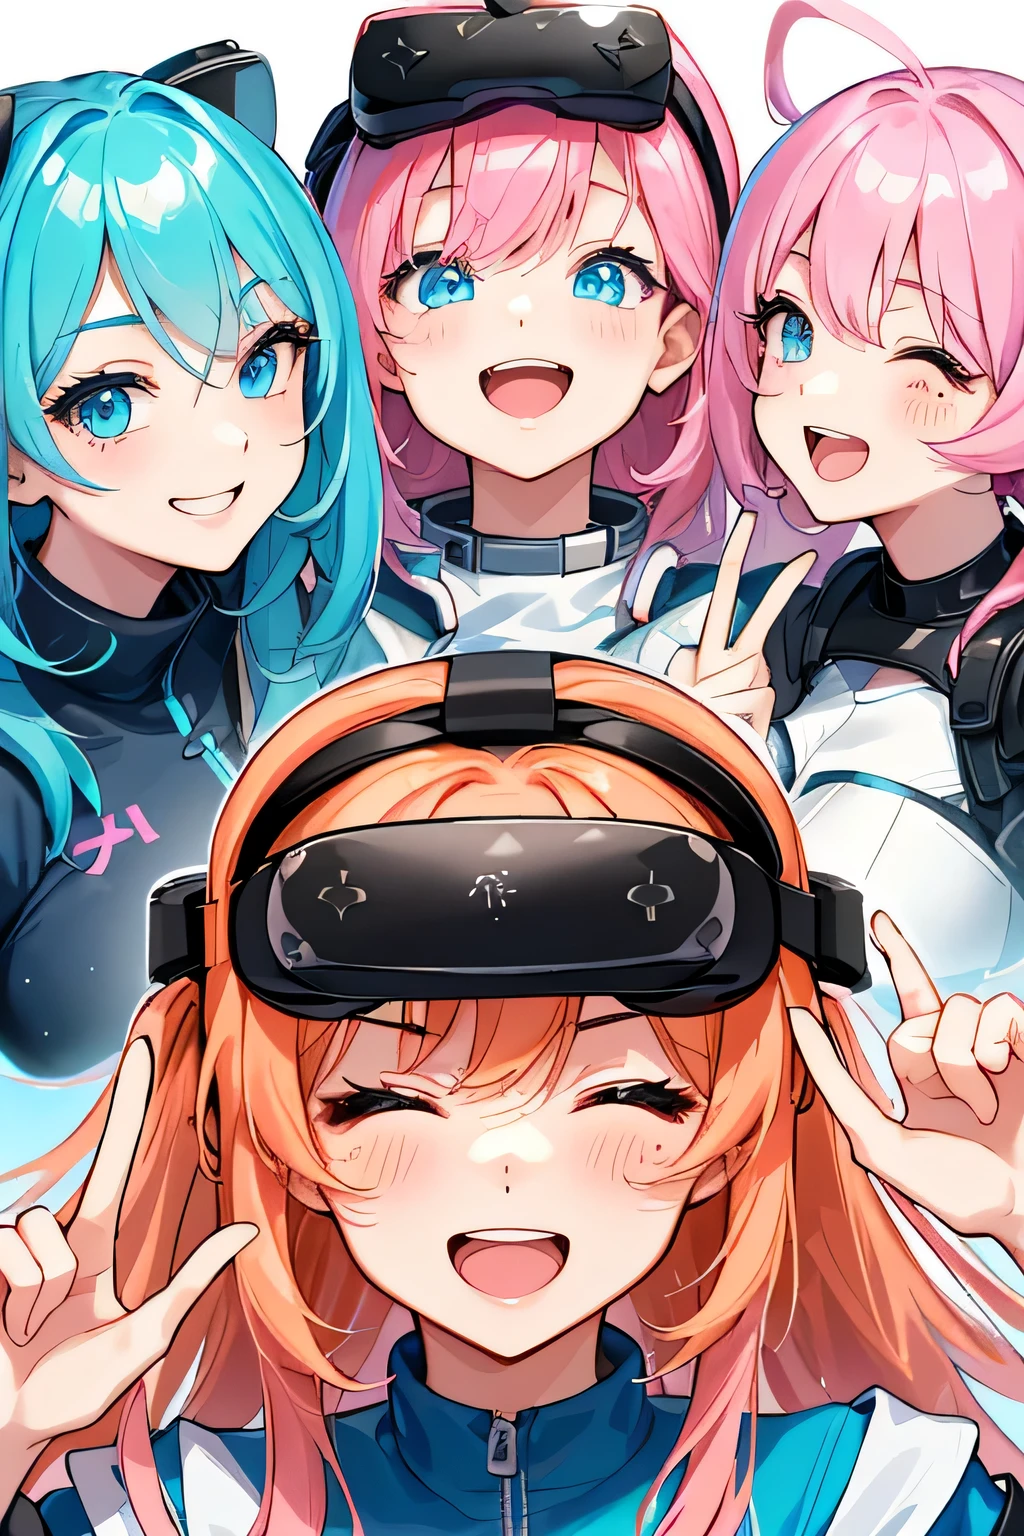 (highest quality:1.4)、(High resolution)、detailed background、(detailed beautiful face:1.4)、anatomically correct、(Depict the normal number of fingers)、(detailed facial expressions)、beautiful and smooth skin、beautiful teenage girl、three women、(huge breasts:1.3)、Bright hair colour、inner hair color、bob hair、ponytail、realistic、perfect body line、double peace sign、I'm so excited、blushing、Open-mouthed smile、

(Three beautiful girls wearing VR goggles enjoying virtual space interaction with virtual pets:1.5)、
Play with and communicate with virtual dogs and cats、
Use VR goggles to take part in a virtual dance 、
Dance rhythmically with adorable virtual characters、
Laughing and dancing happily together、

Enjoy a virtual picnic or outing using VR goggles、
Play in a virtual park